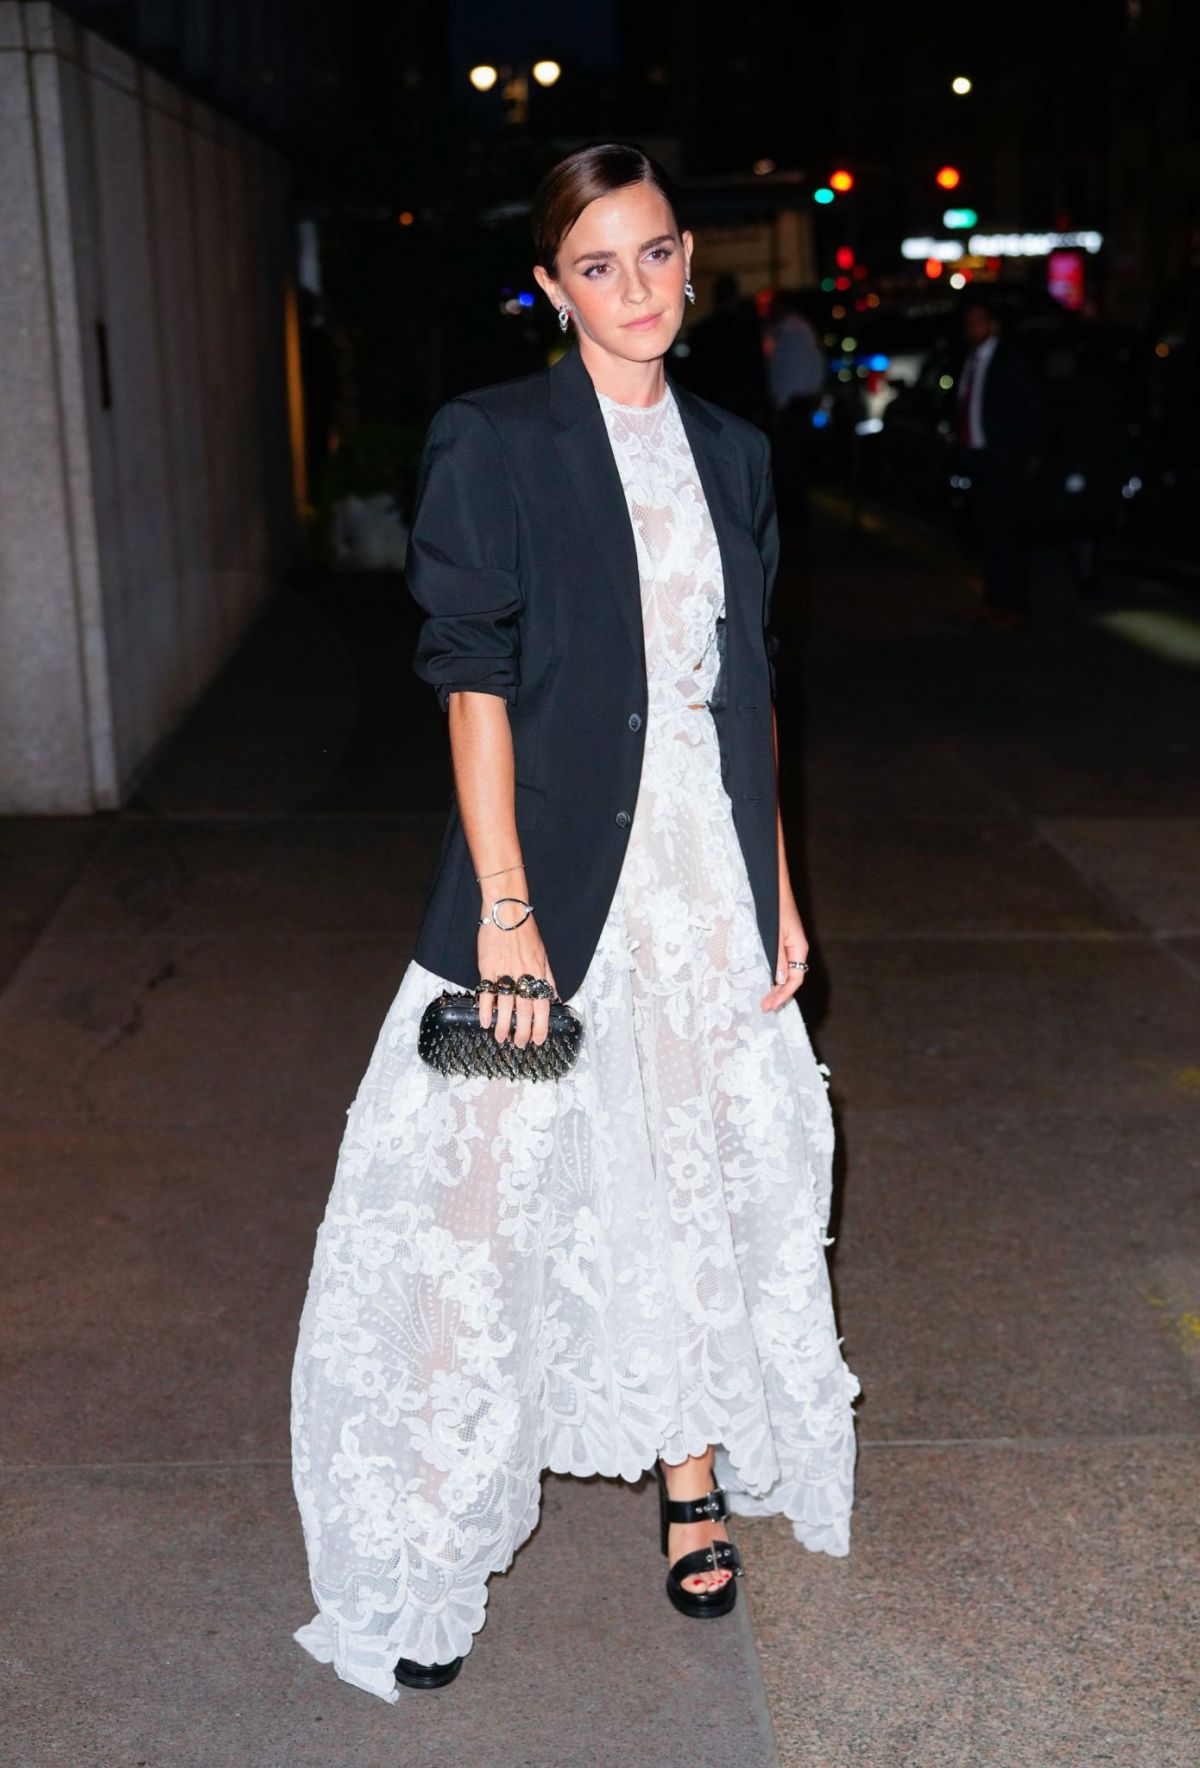 Emma Watson attends Caring for Women Dinner in White Floral Dress in New York, Sep 2022 5